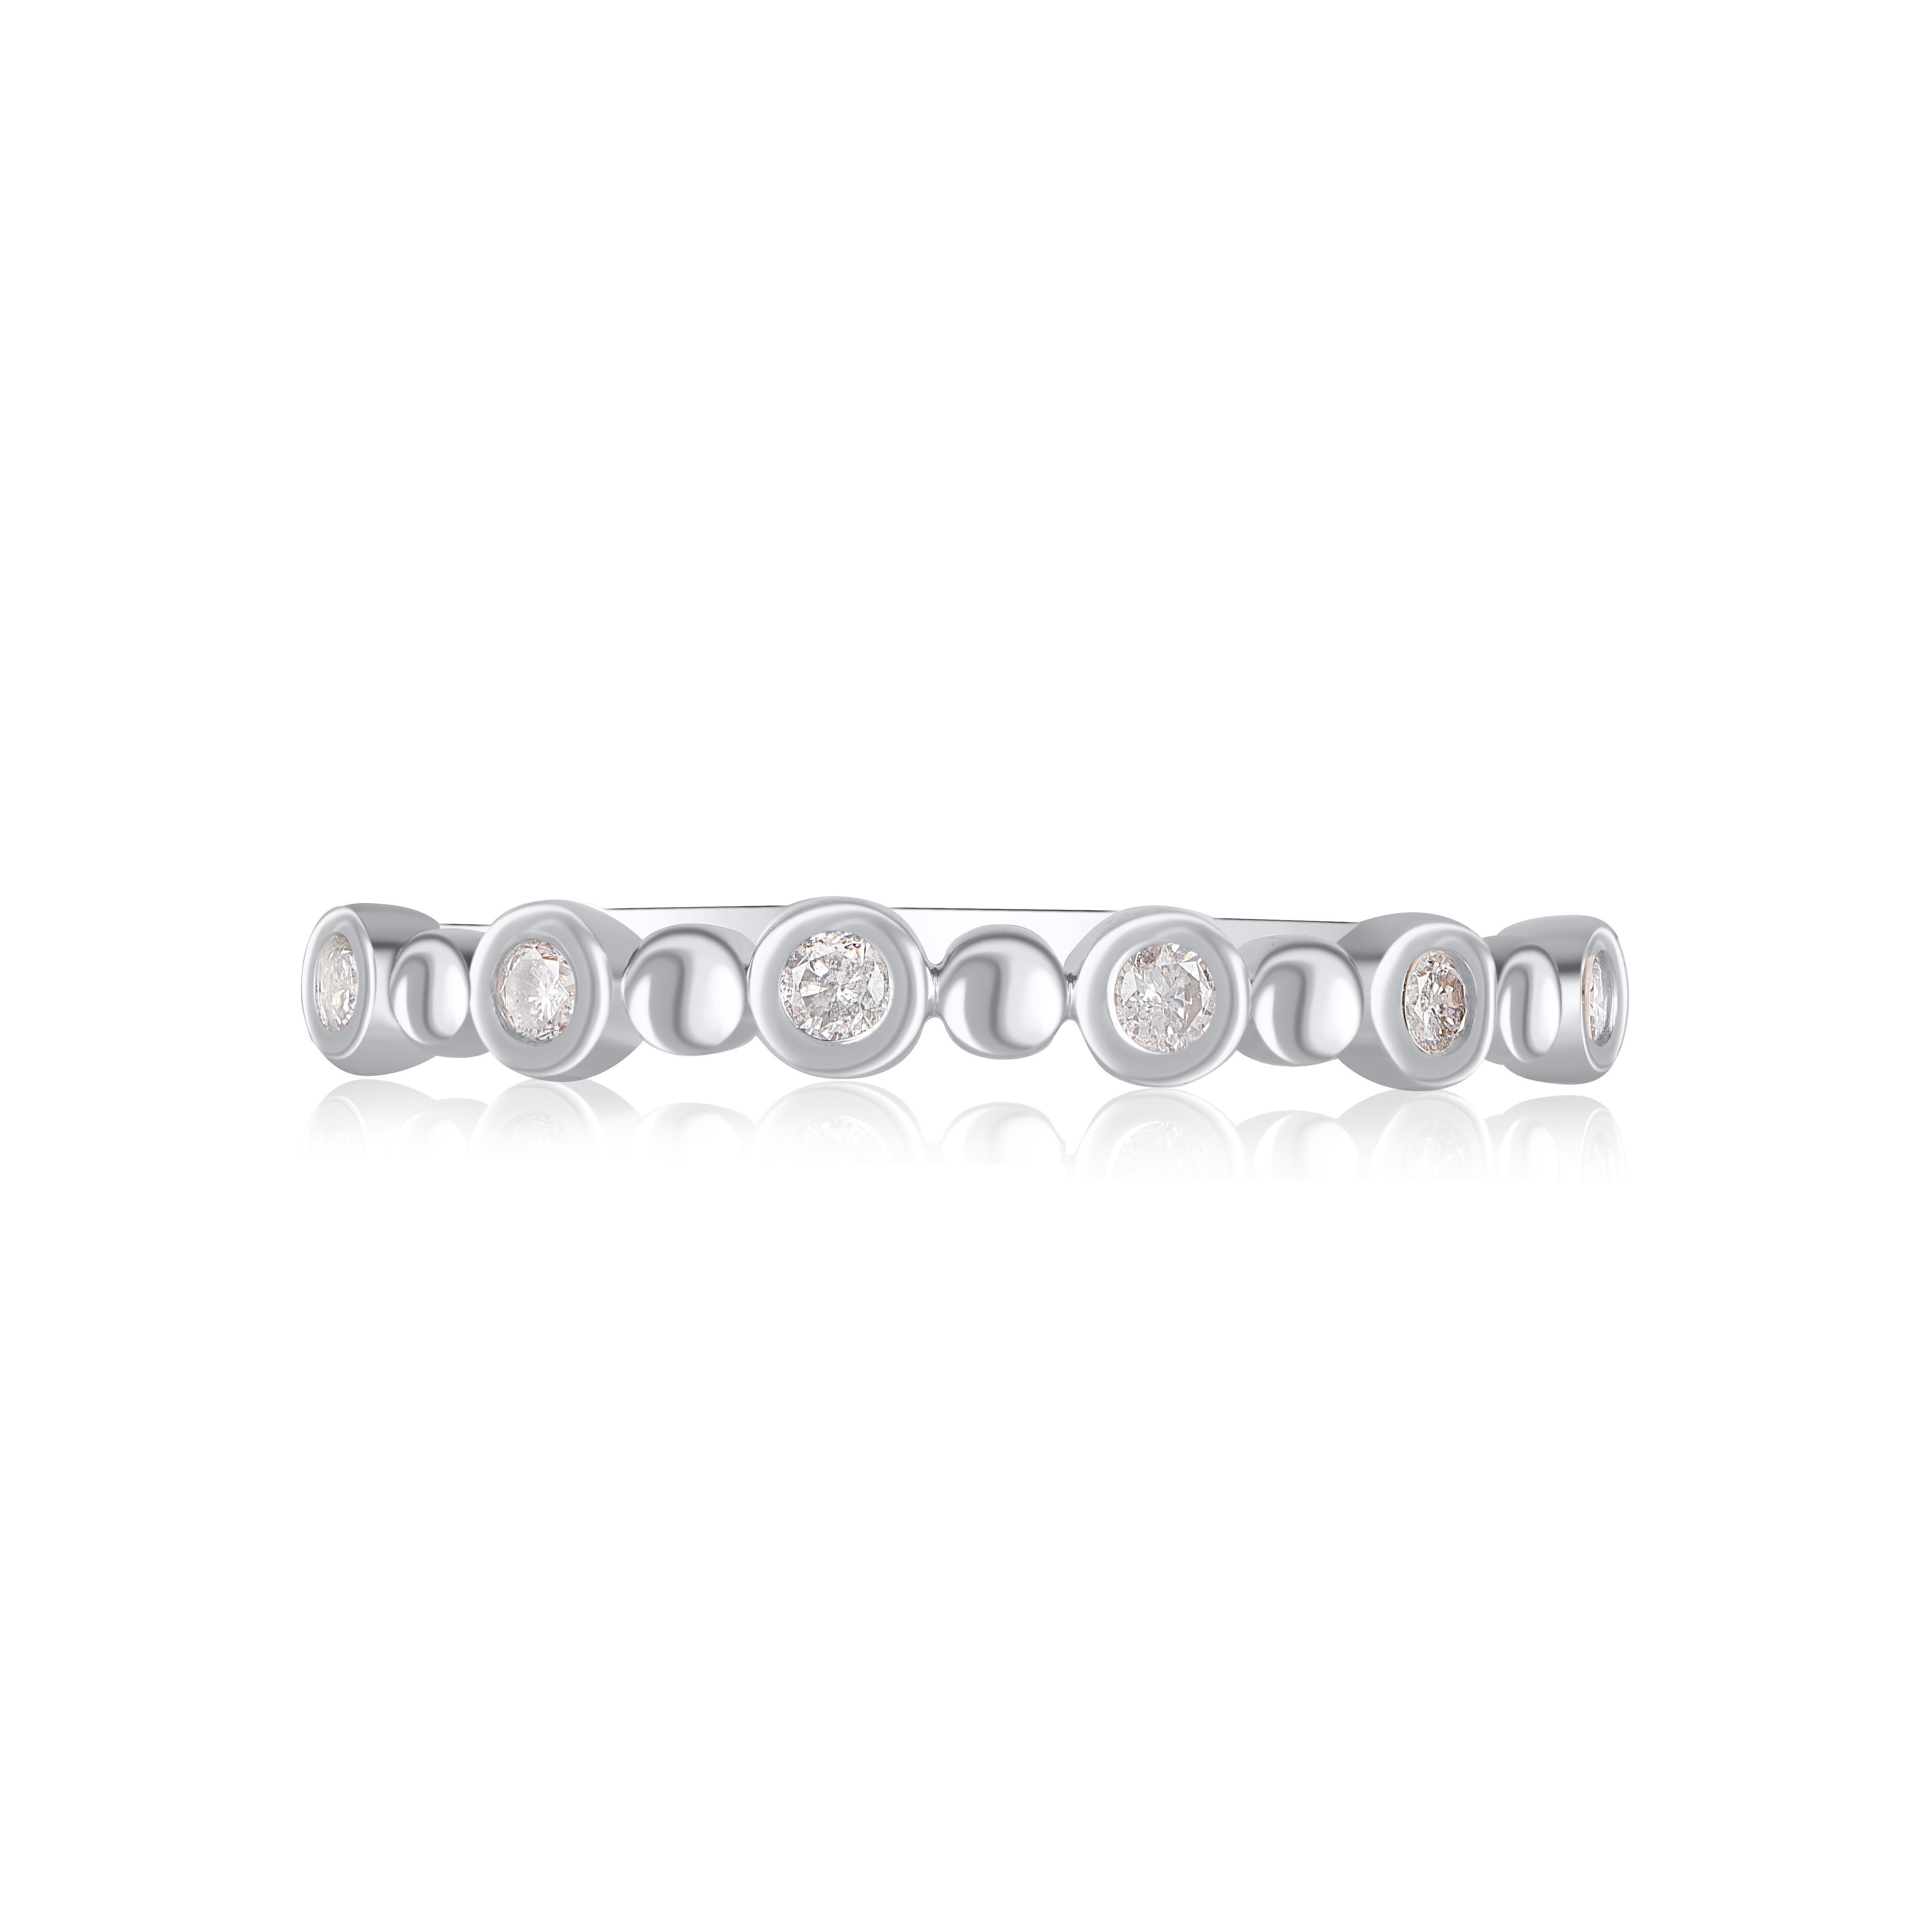 Honor your special day with this exceptional diamond band ring. This band ring features a sparkling 6 brilliant cut diamonds beautifully set in bezel setting. The total diamond weight is 0.12 Carat. The diamonds are graded as H-I color and I2